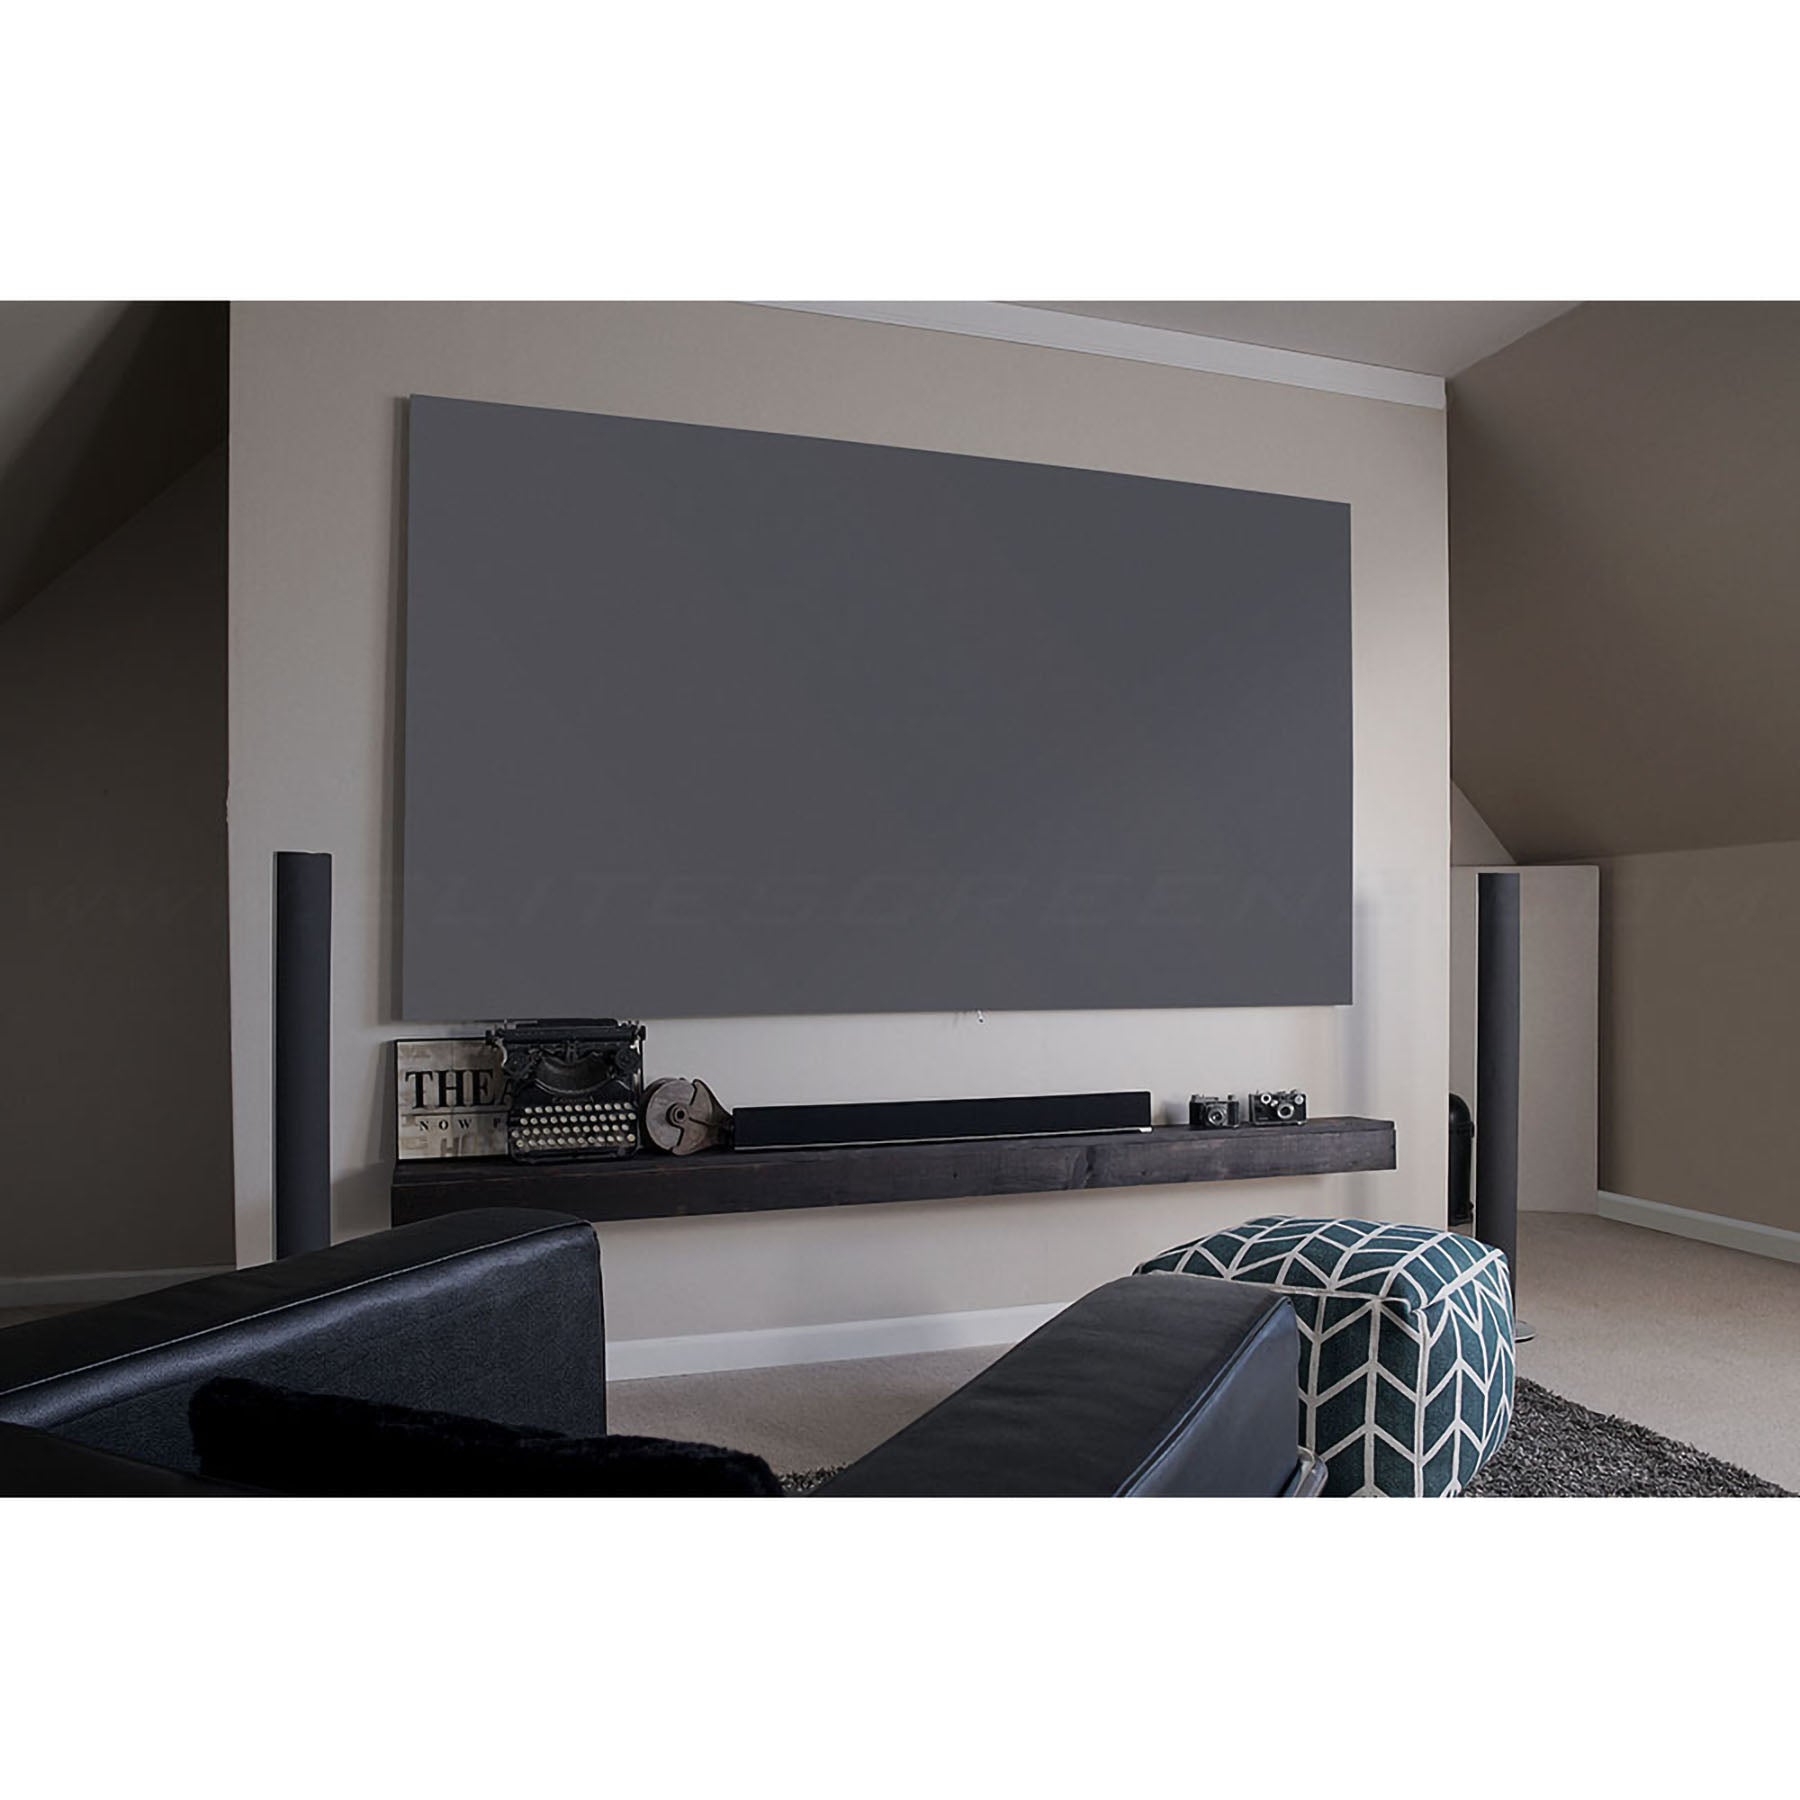 Elite Screens AR135DHD3 Aeon CineGrey 3D 135" 16:9 4K Fixed Screen with Edge Free Frame & Ambient Light Rejecting